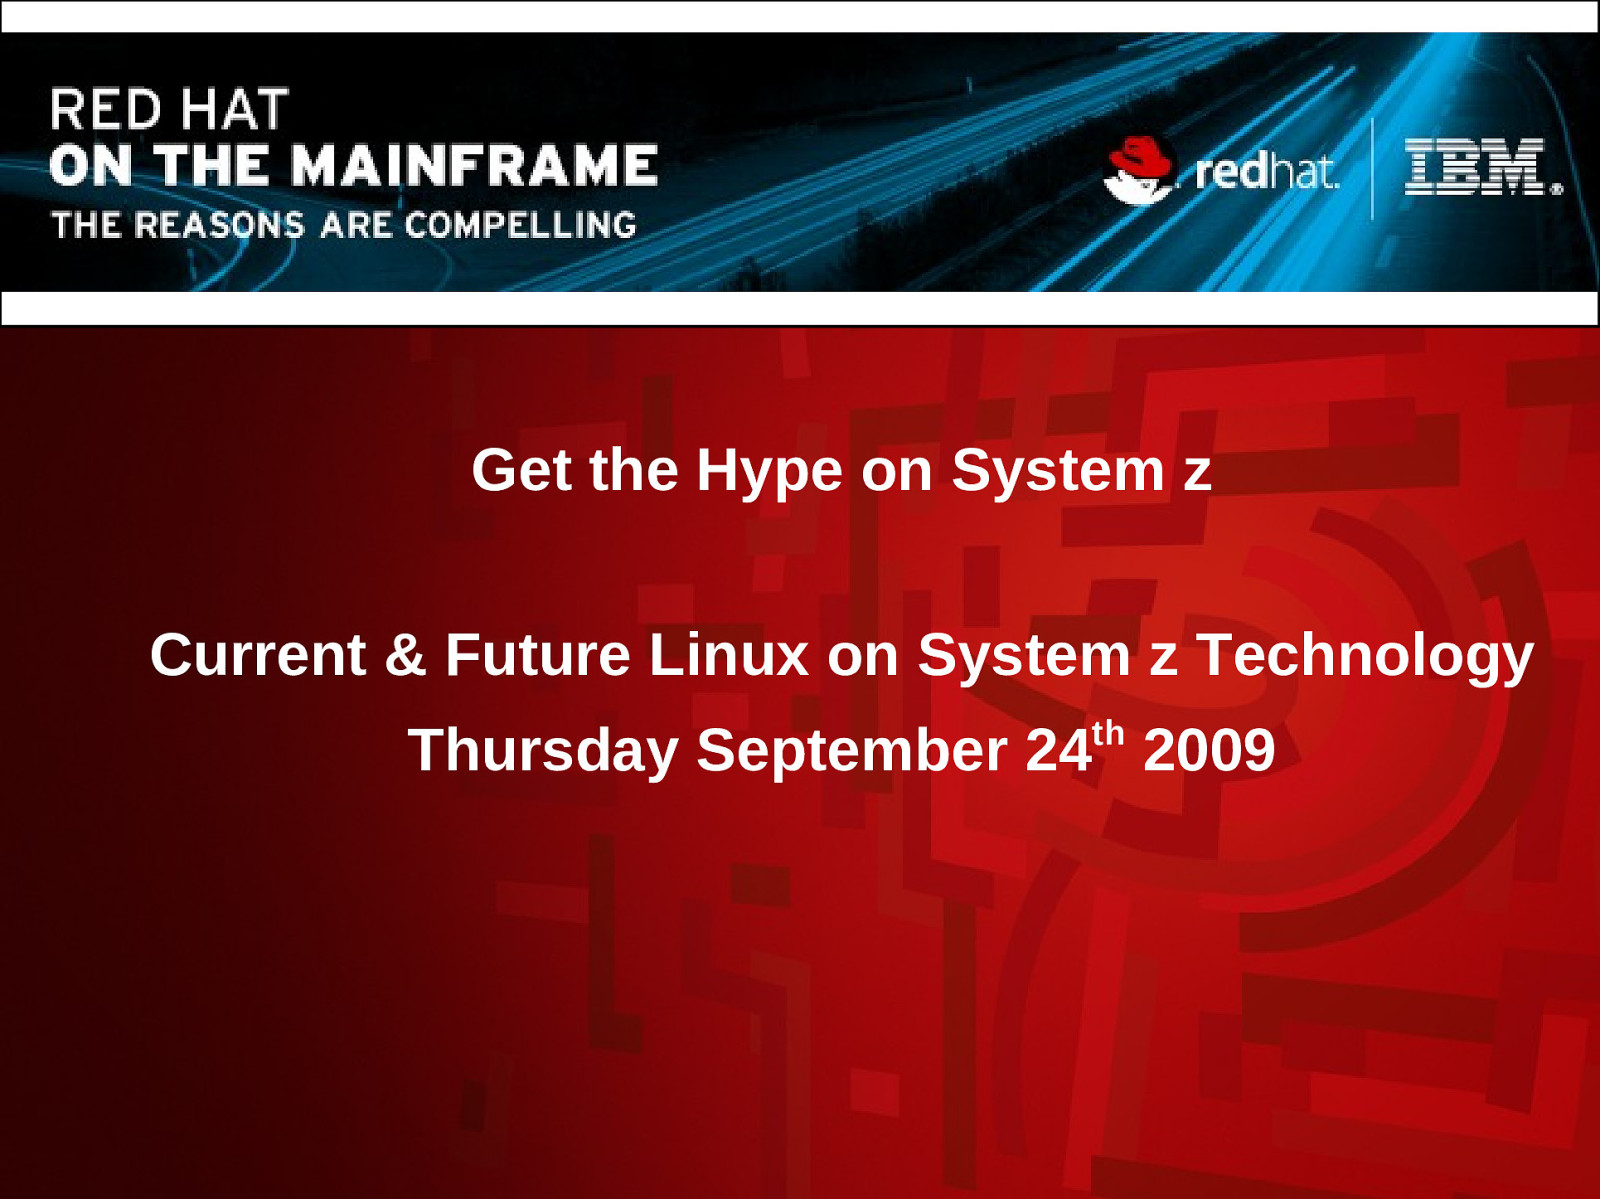 Current & Future Linux on System z Technology (RHEL 5.4 and beyond)